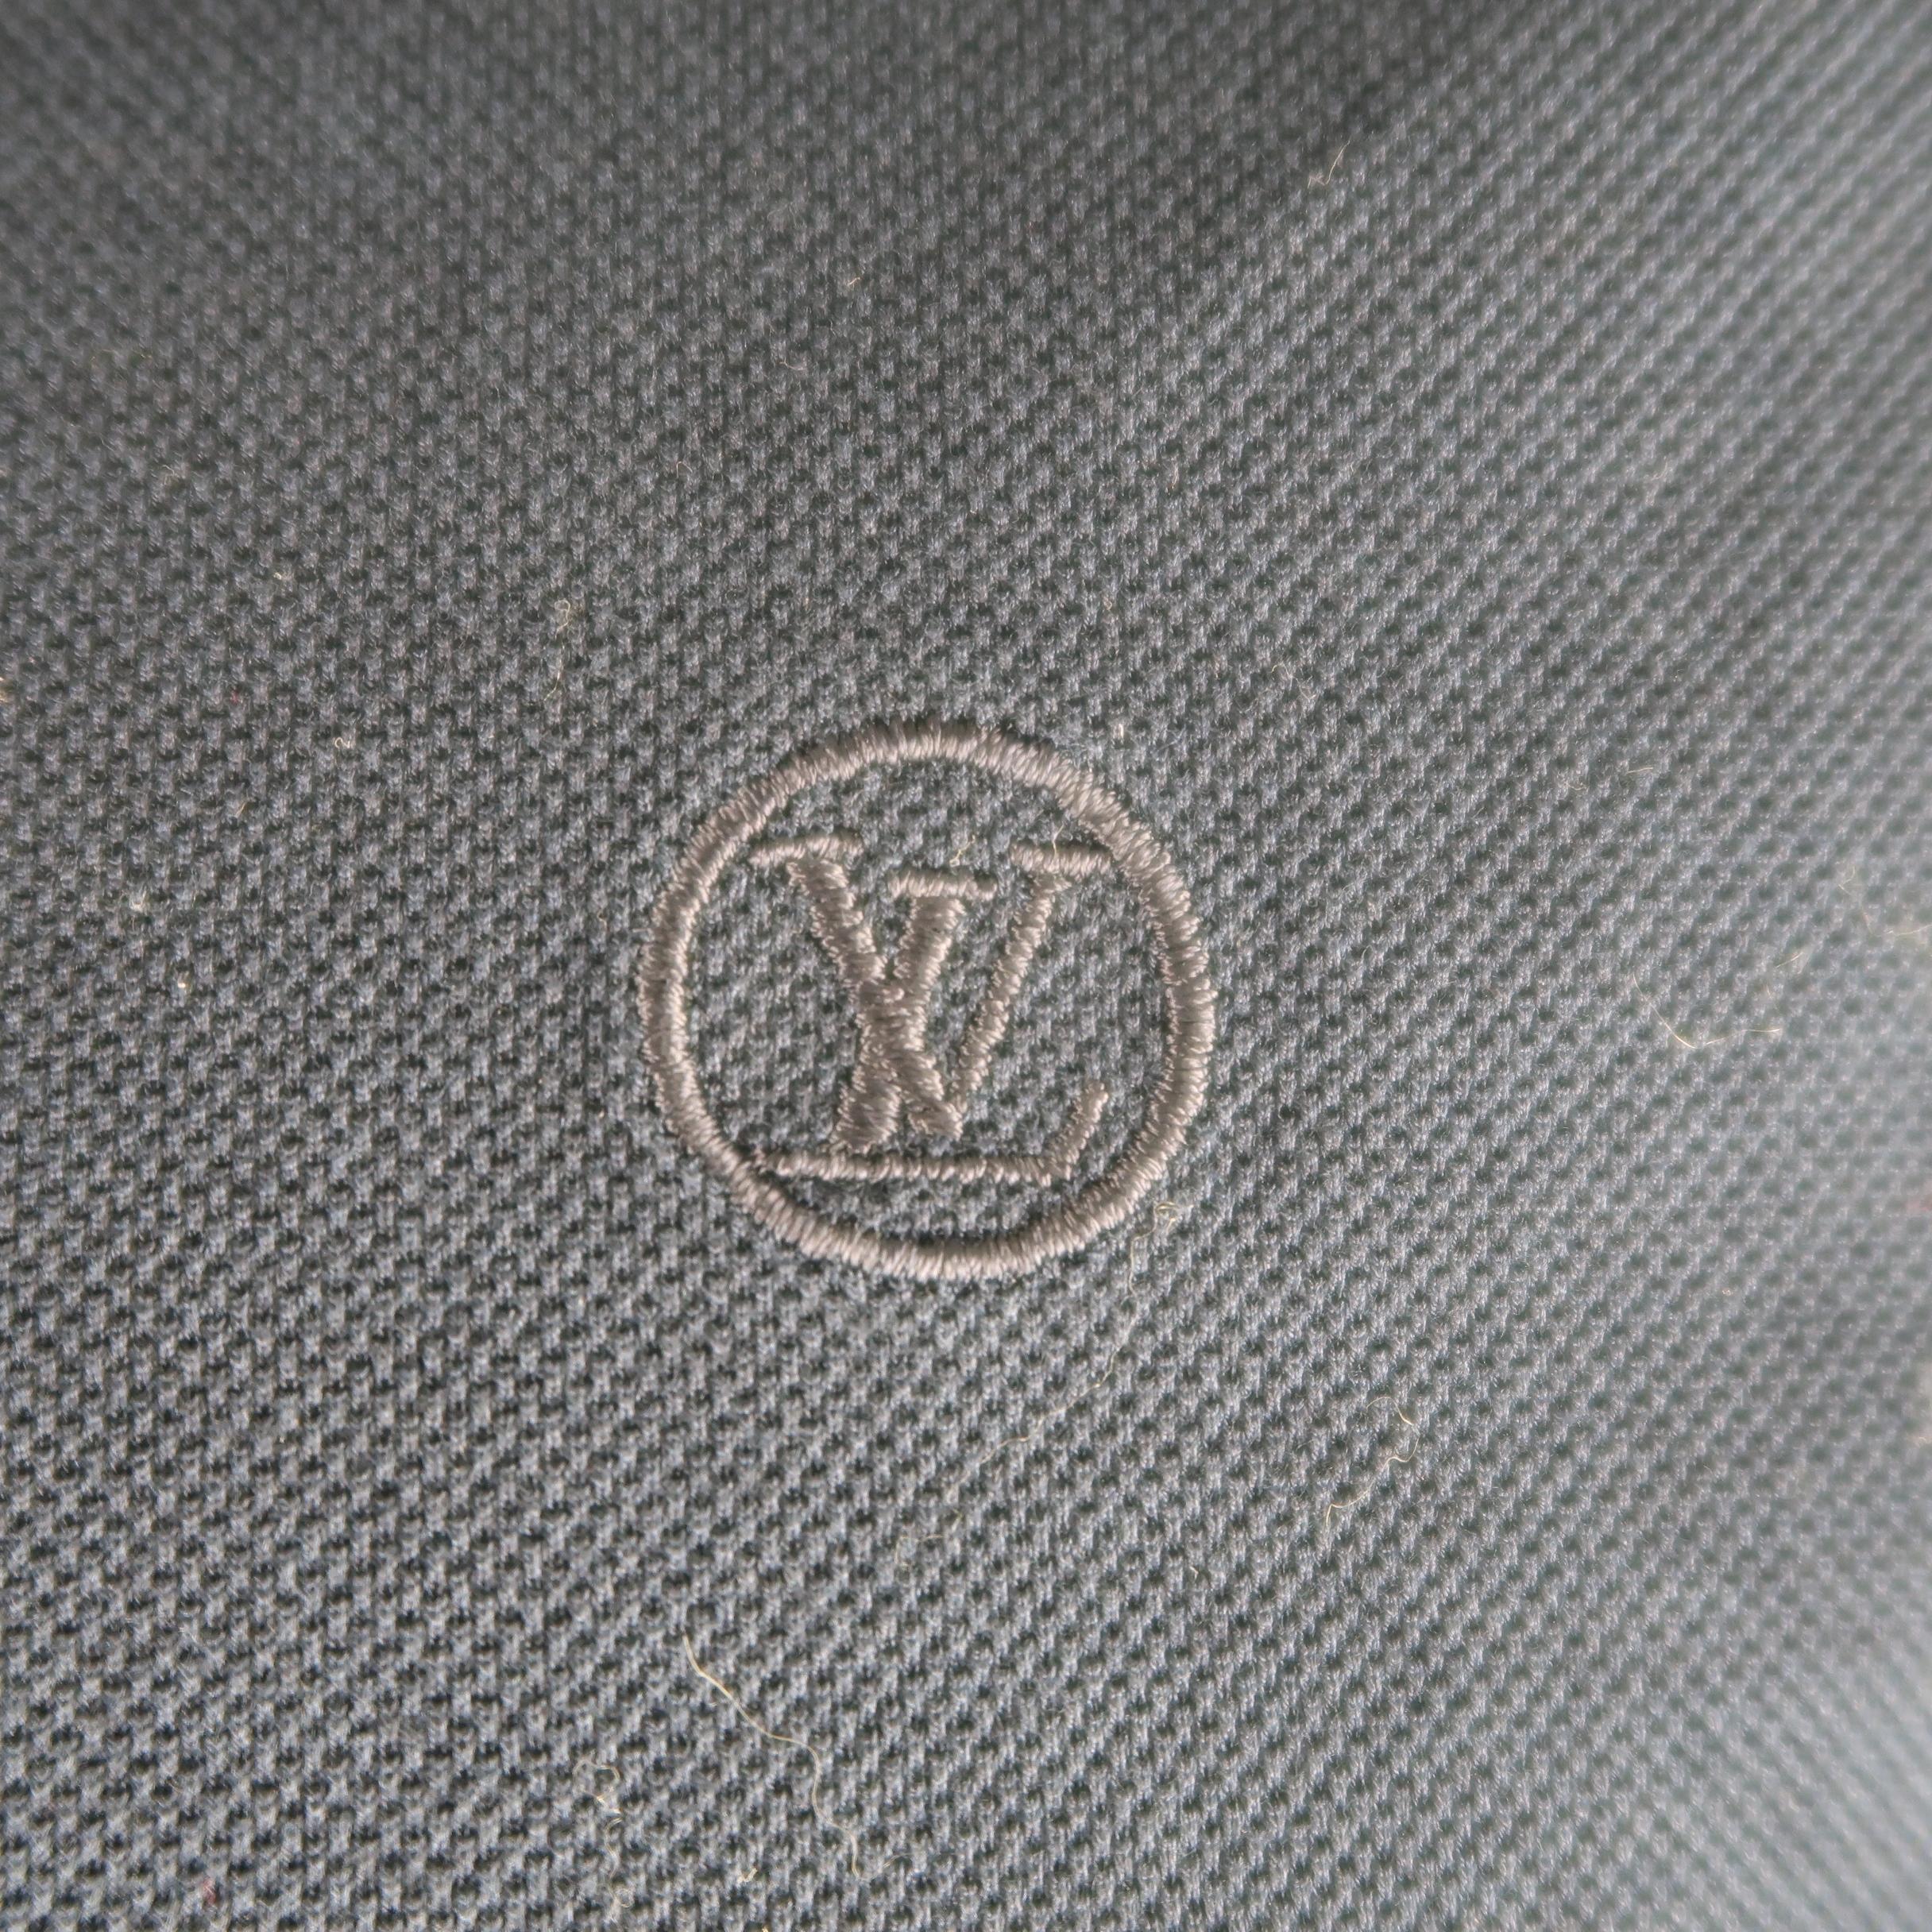 LOUIS VUITTON  POLO shirt come in navy tone in cotton pique, with the LV logo embroidered on the chest, and buttoned. 

Made in Italy. 
Excellent Pre-Owned Condition.
Marked: L IT
 
Measurements:
 
Shoulder: 17 in.
Chest: 41 in.
Sleeve: 9 